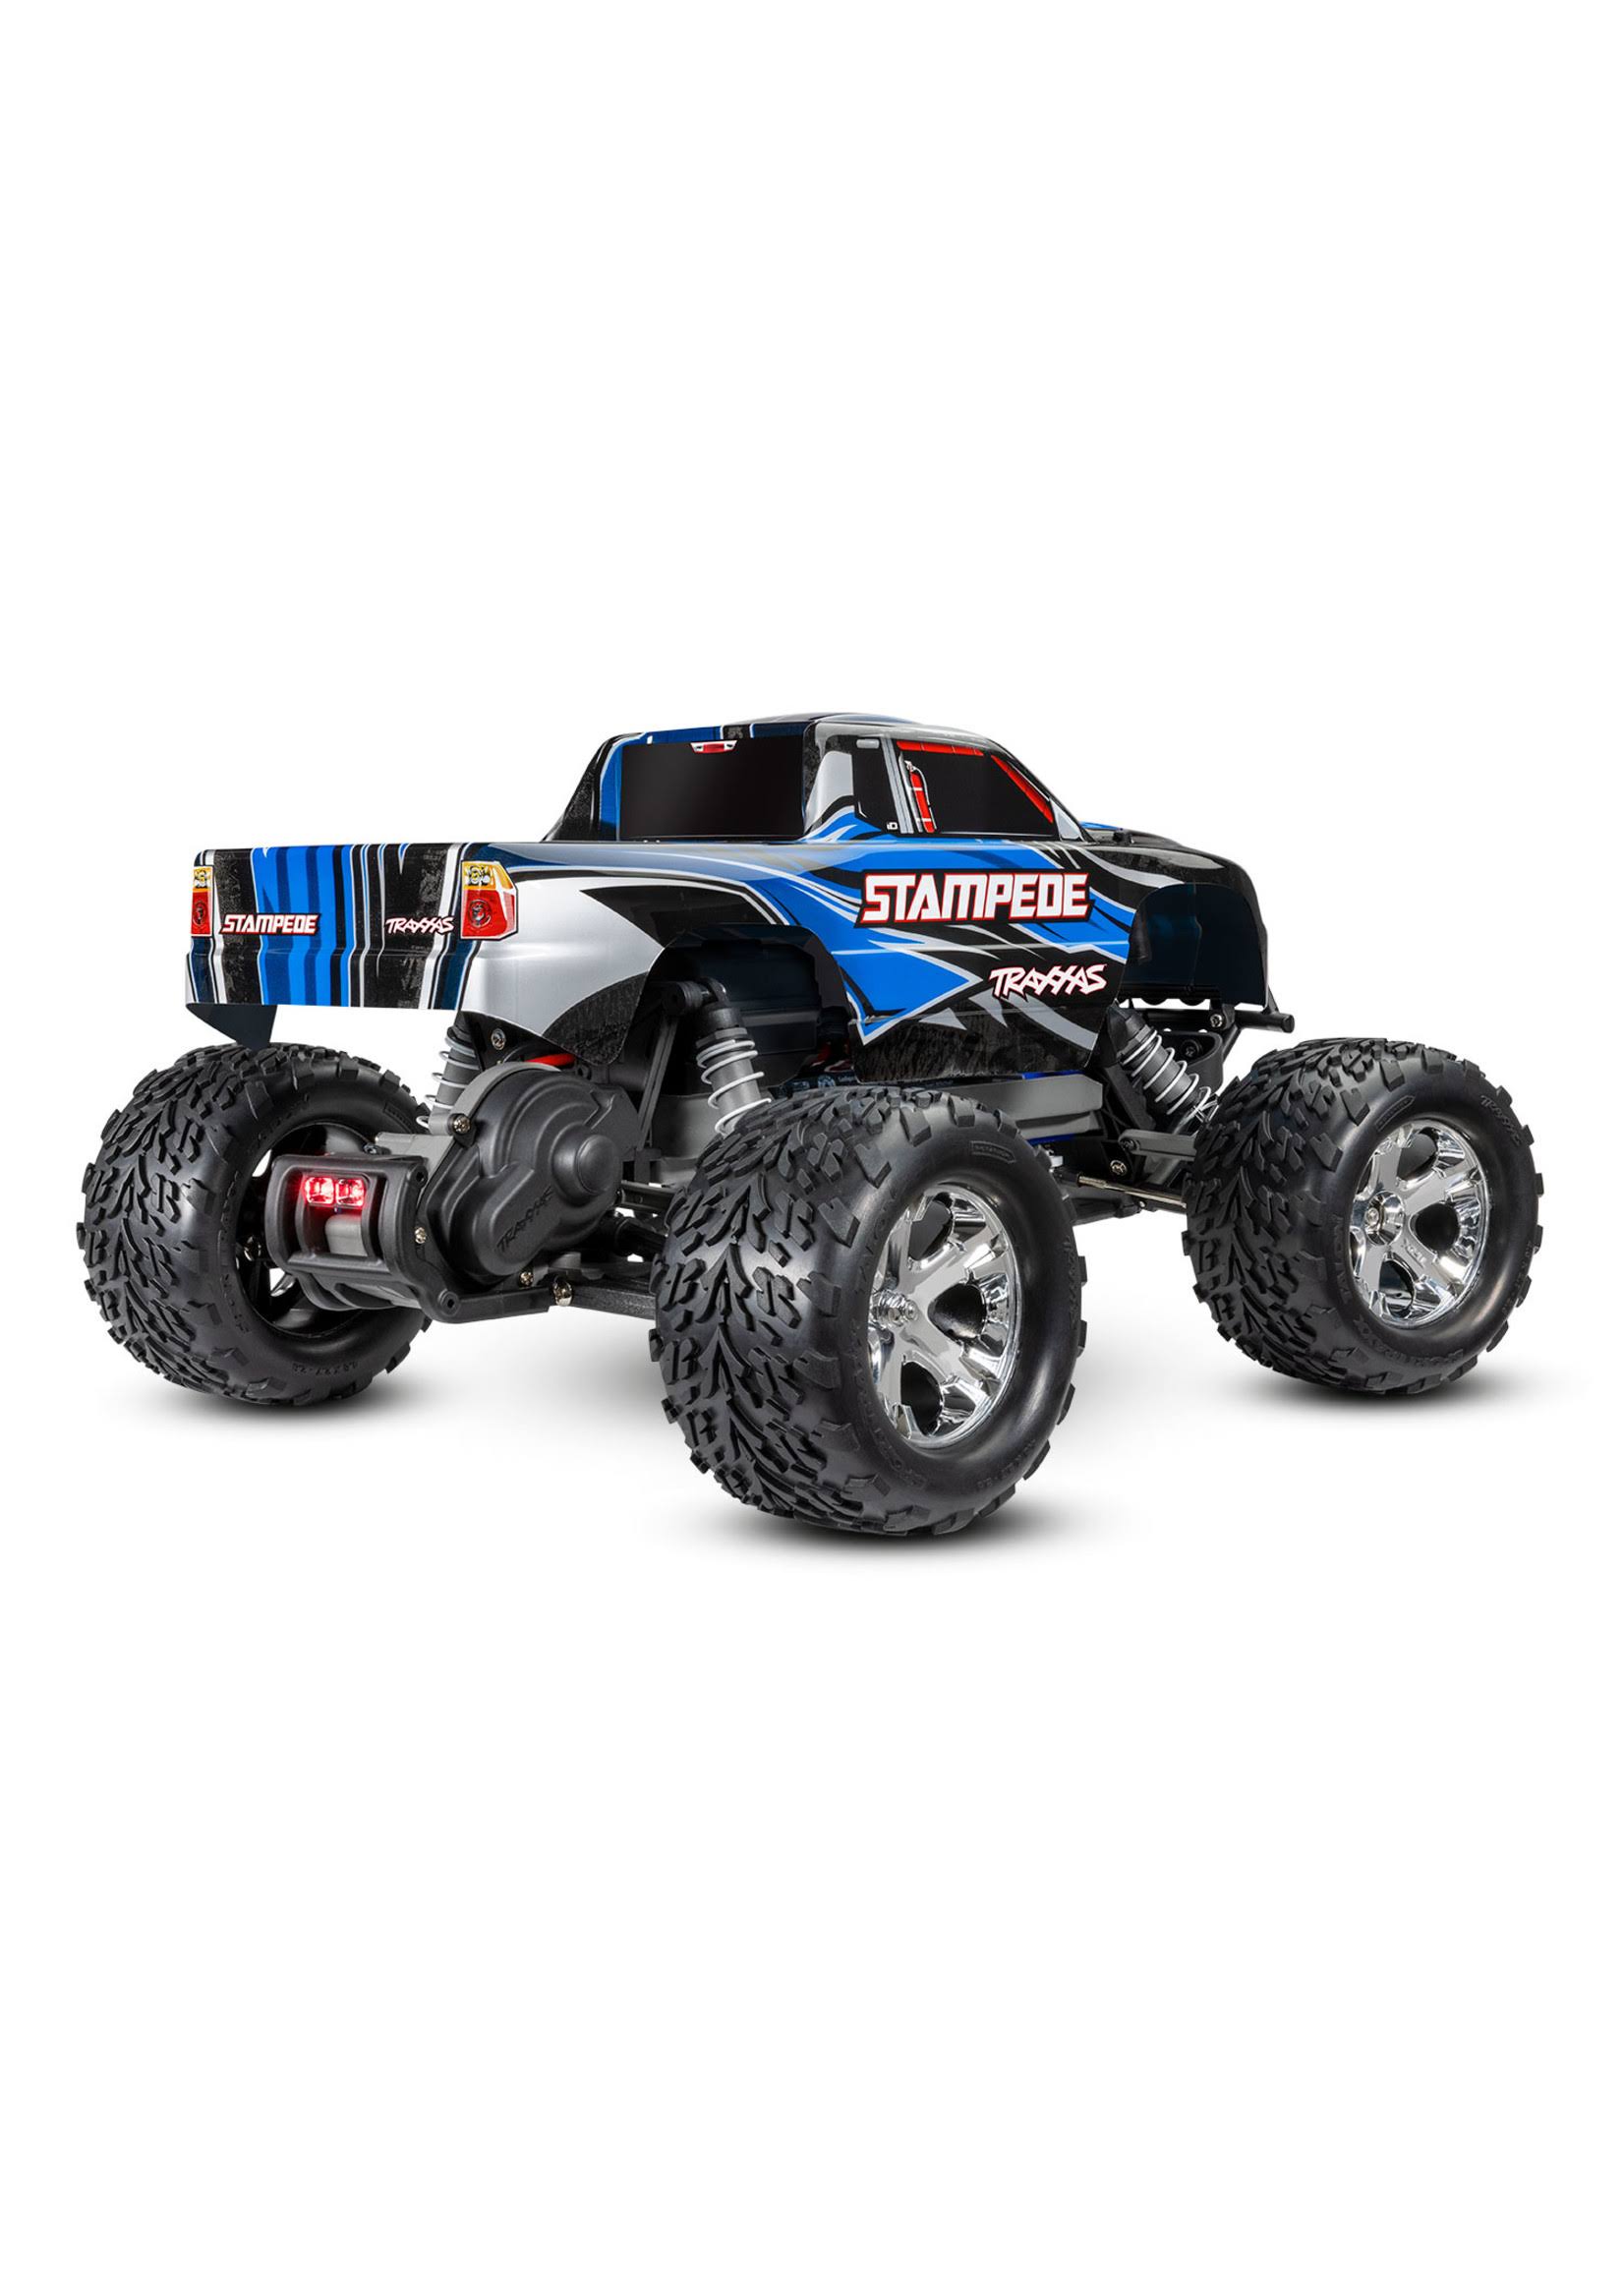 Traxxas Stampede 2WD 1/10 Monster Truck RTR TQ - LED (Blue)